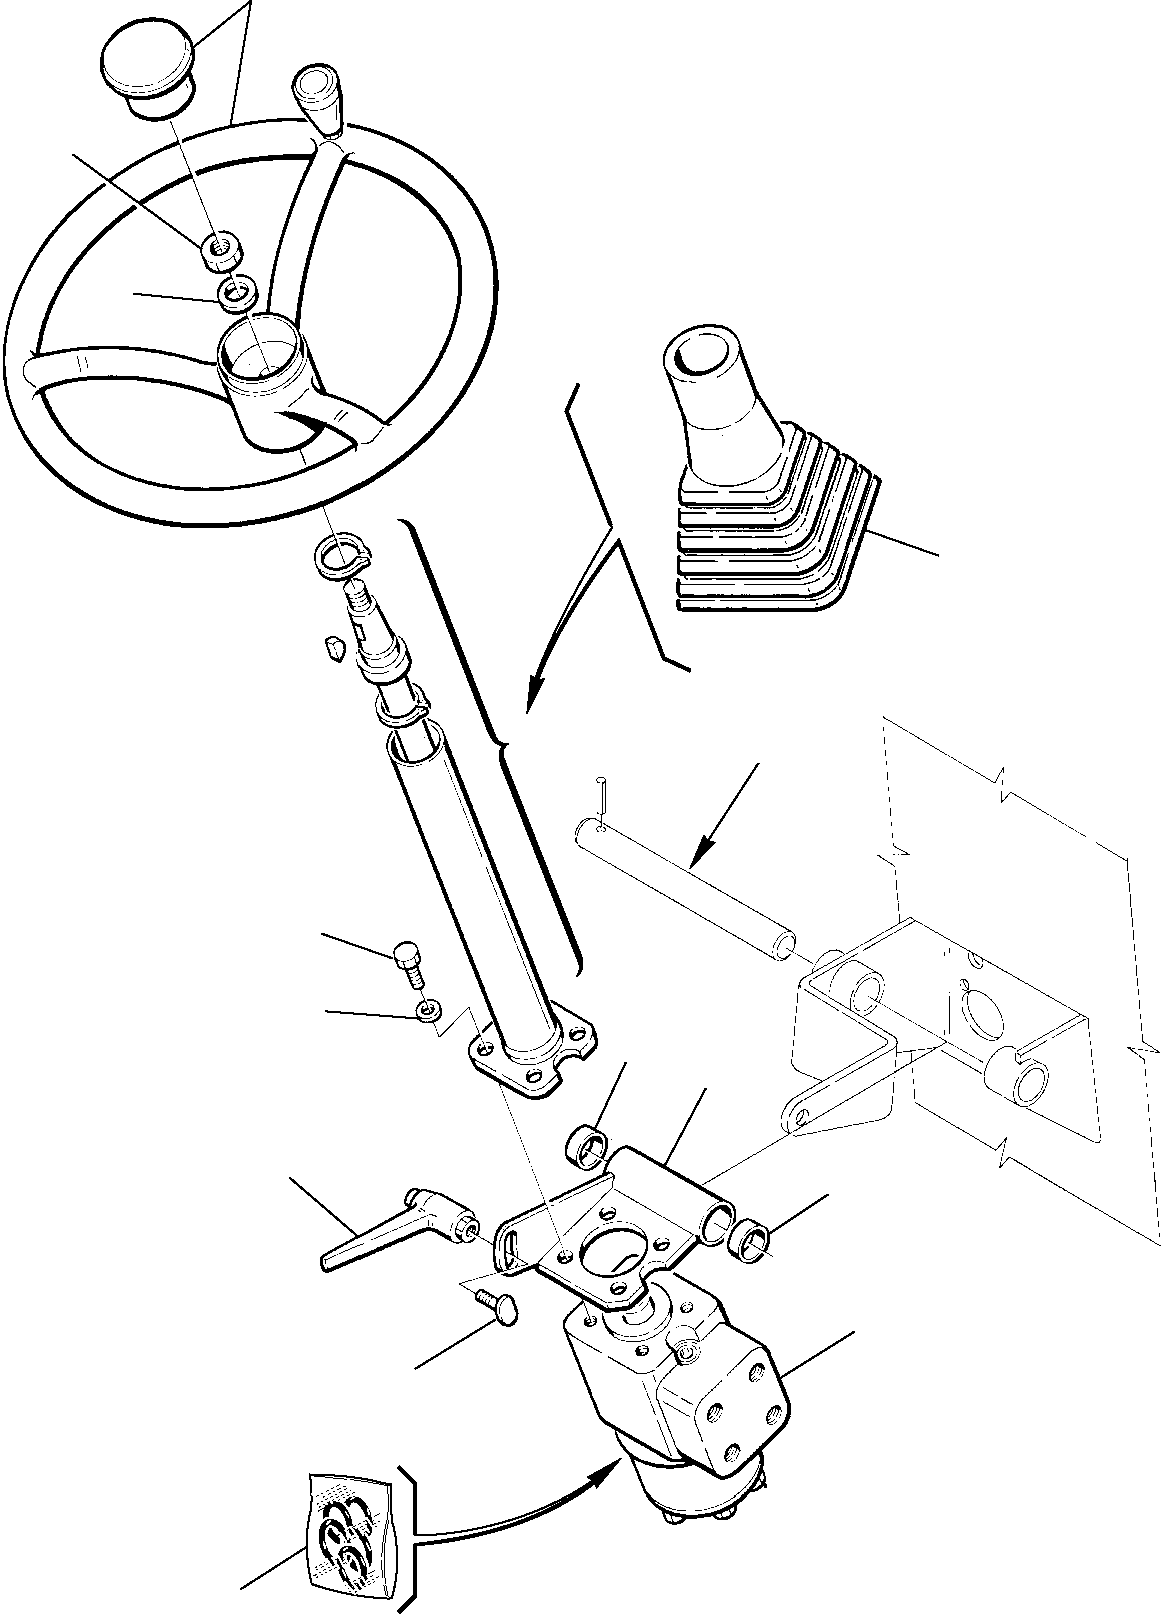 Part 2. STEERING WHEEL, COLUMN AND UNIT [4100]